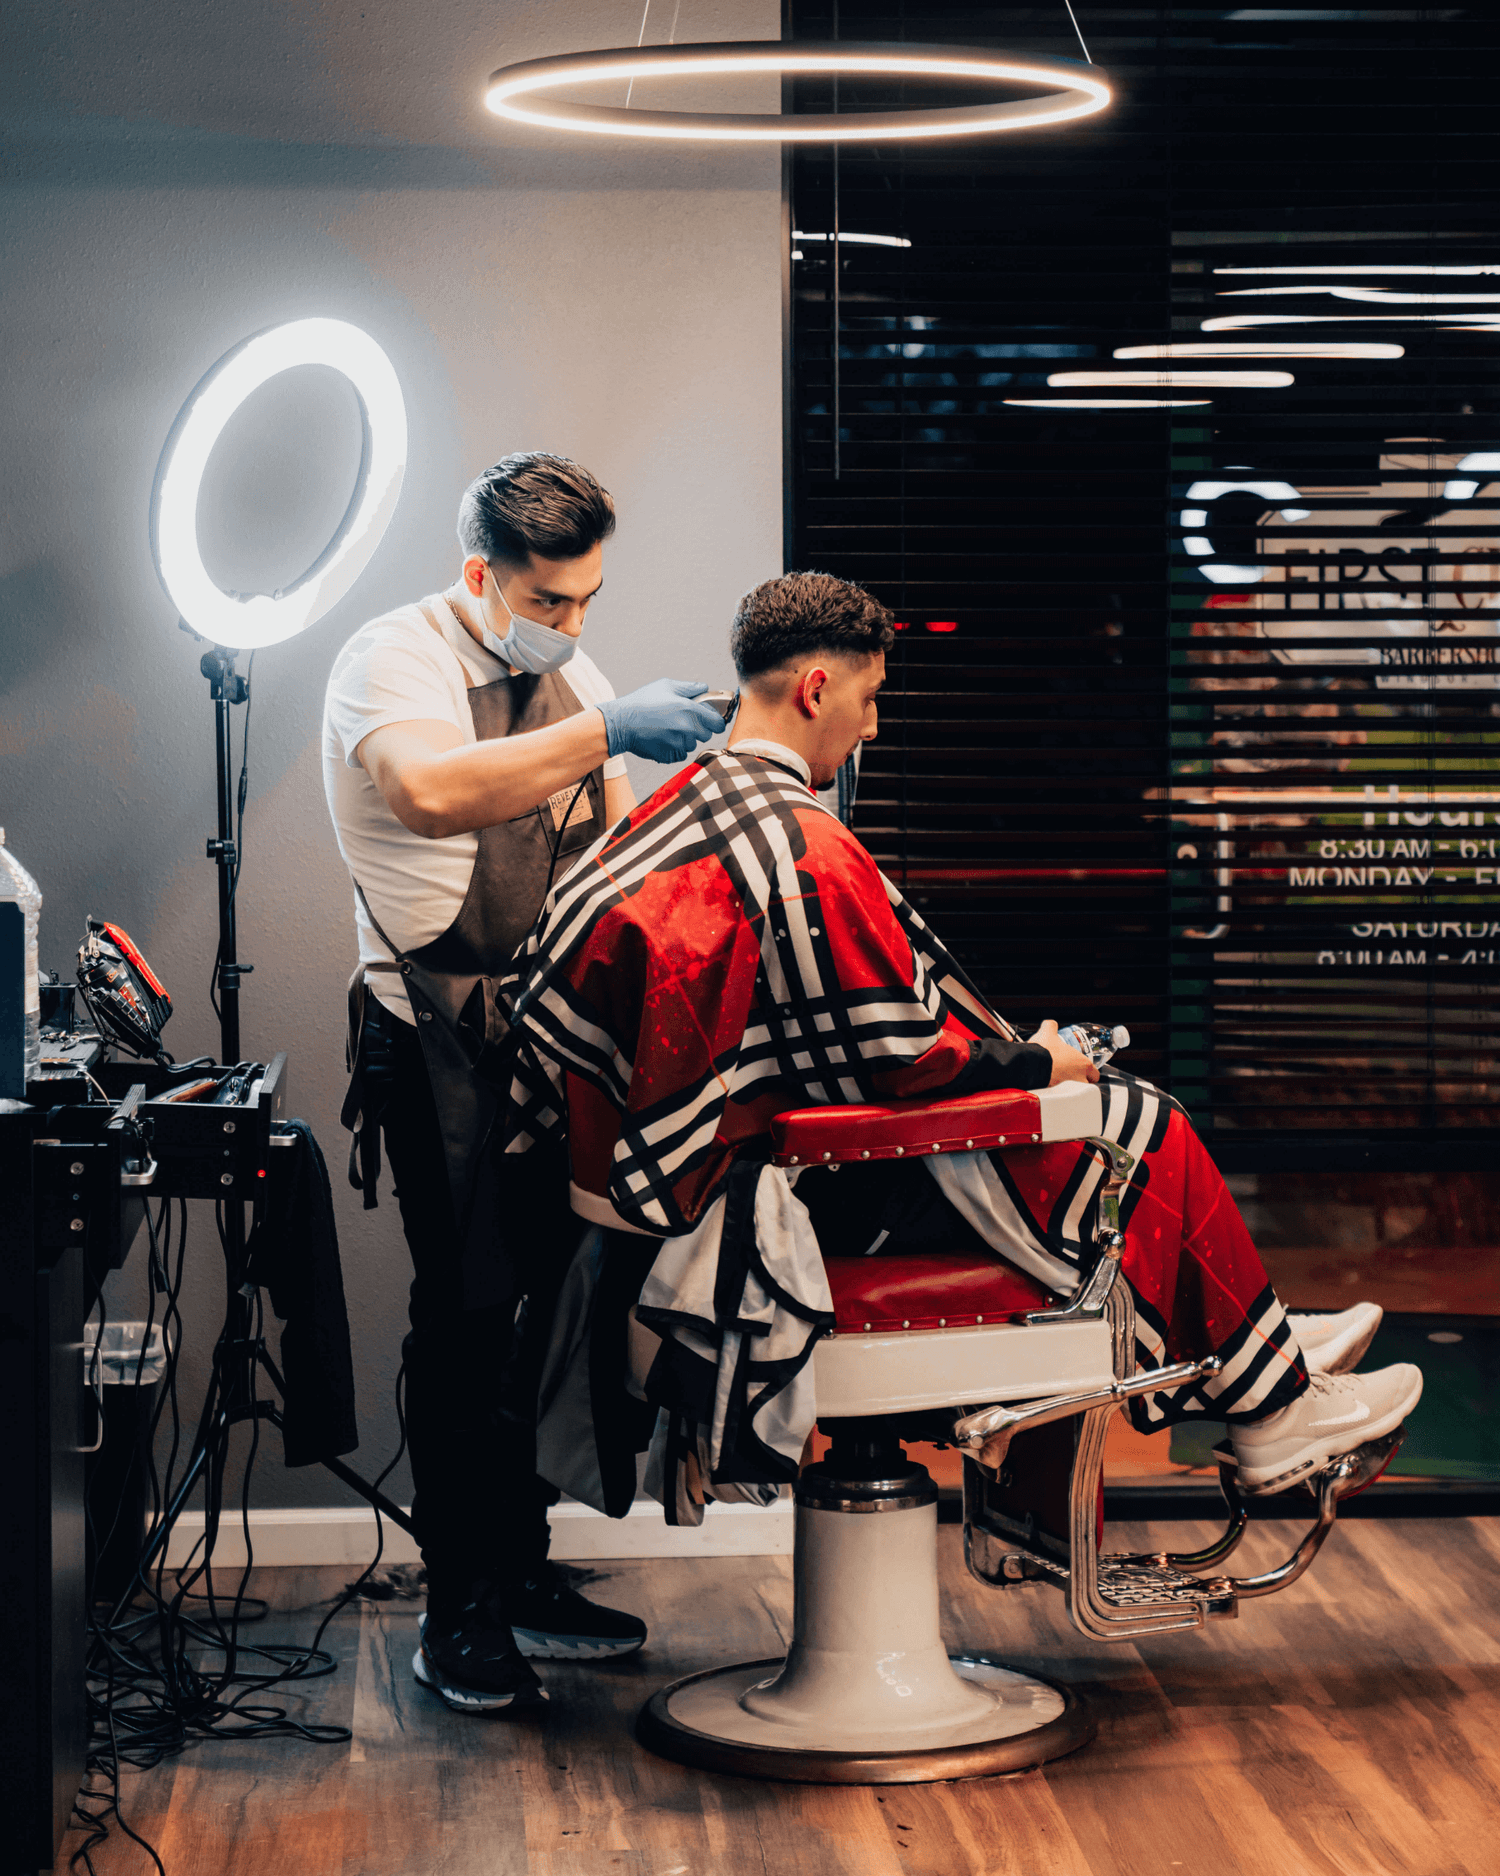 Barber giving a client a haircut with a bright white light behind them.